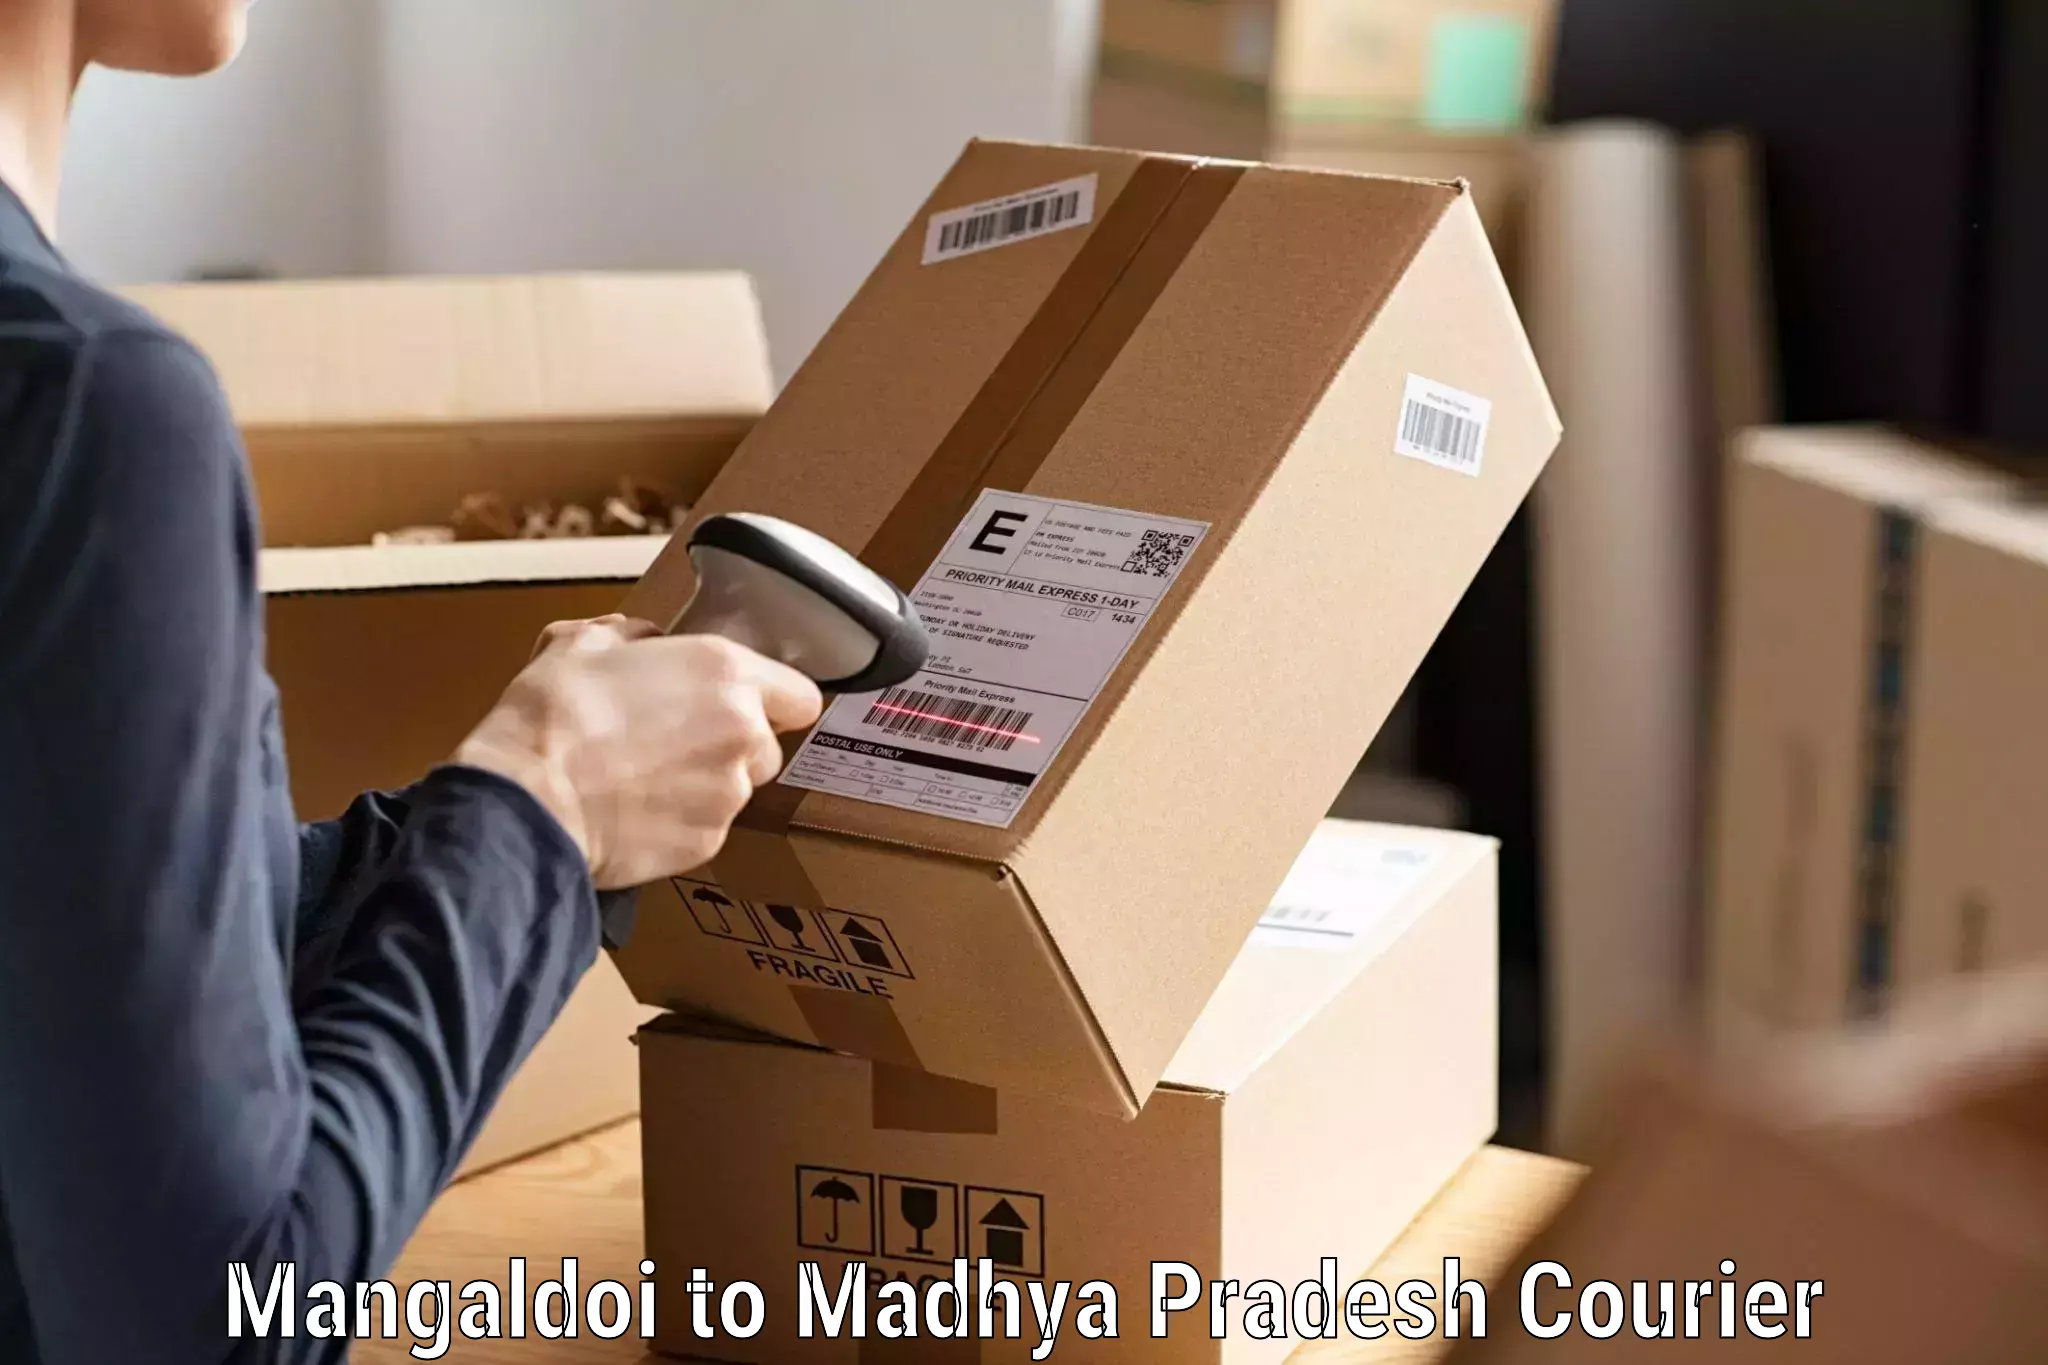 Online package tracking Mangaldoi to BHEL Bhopal